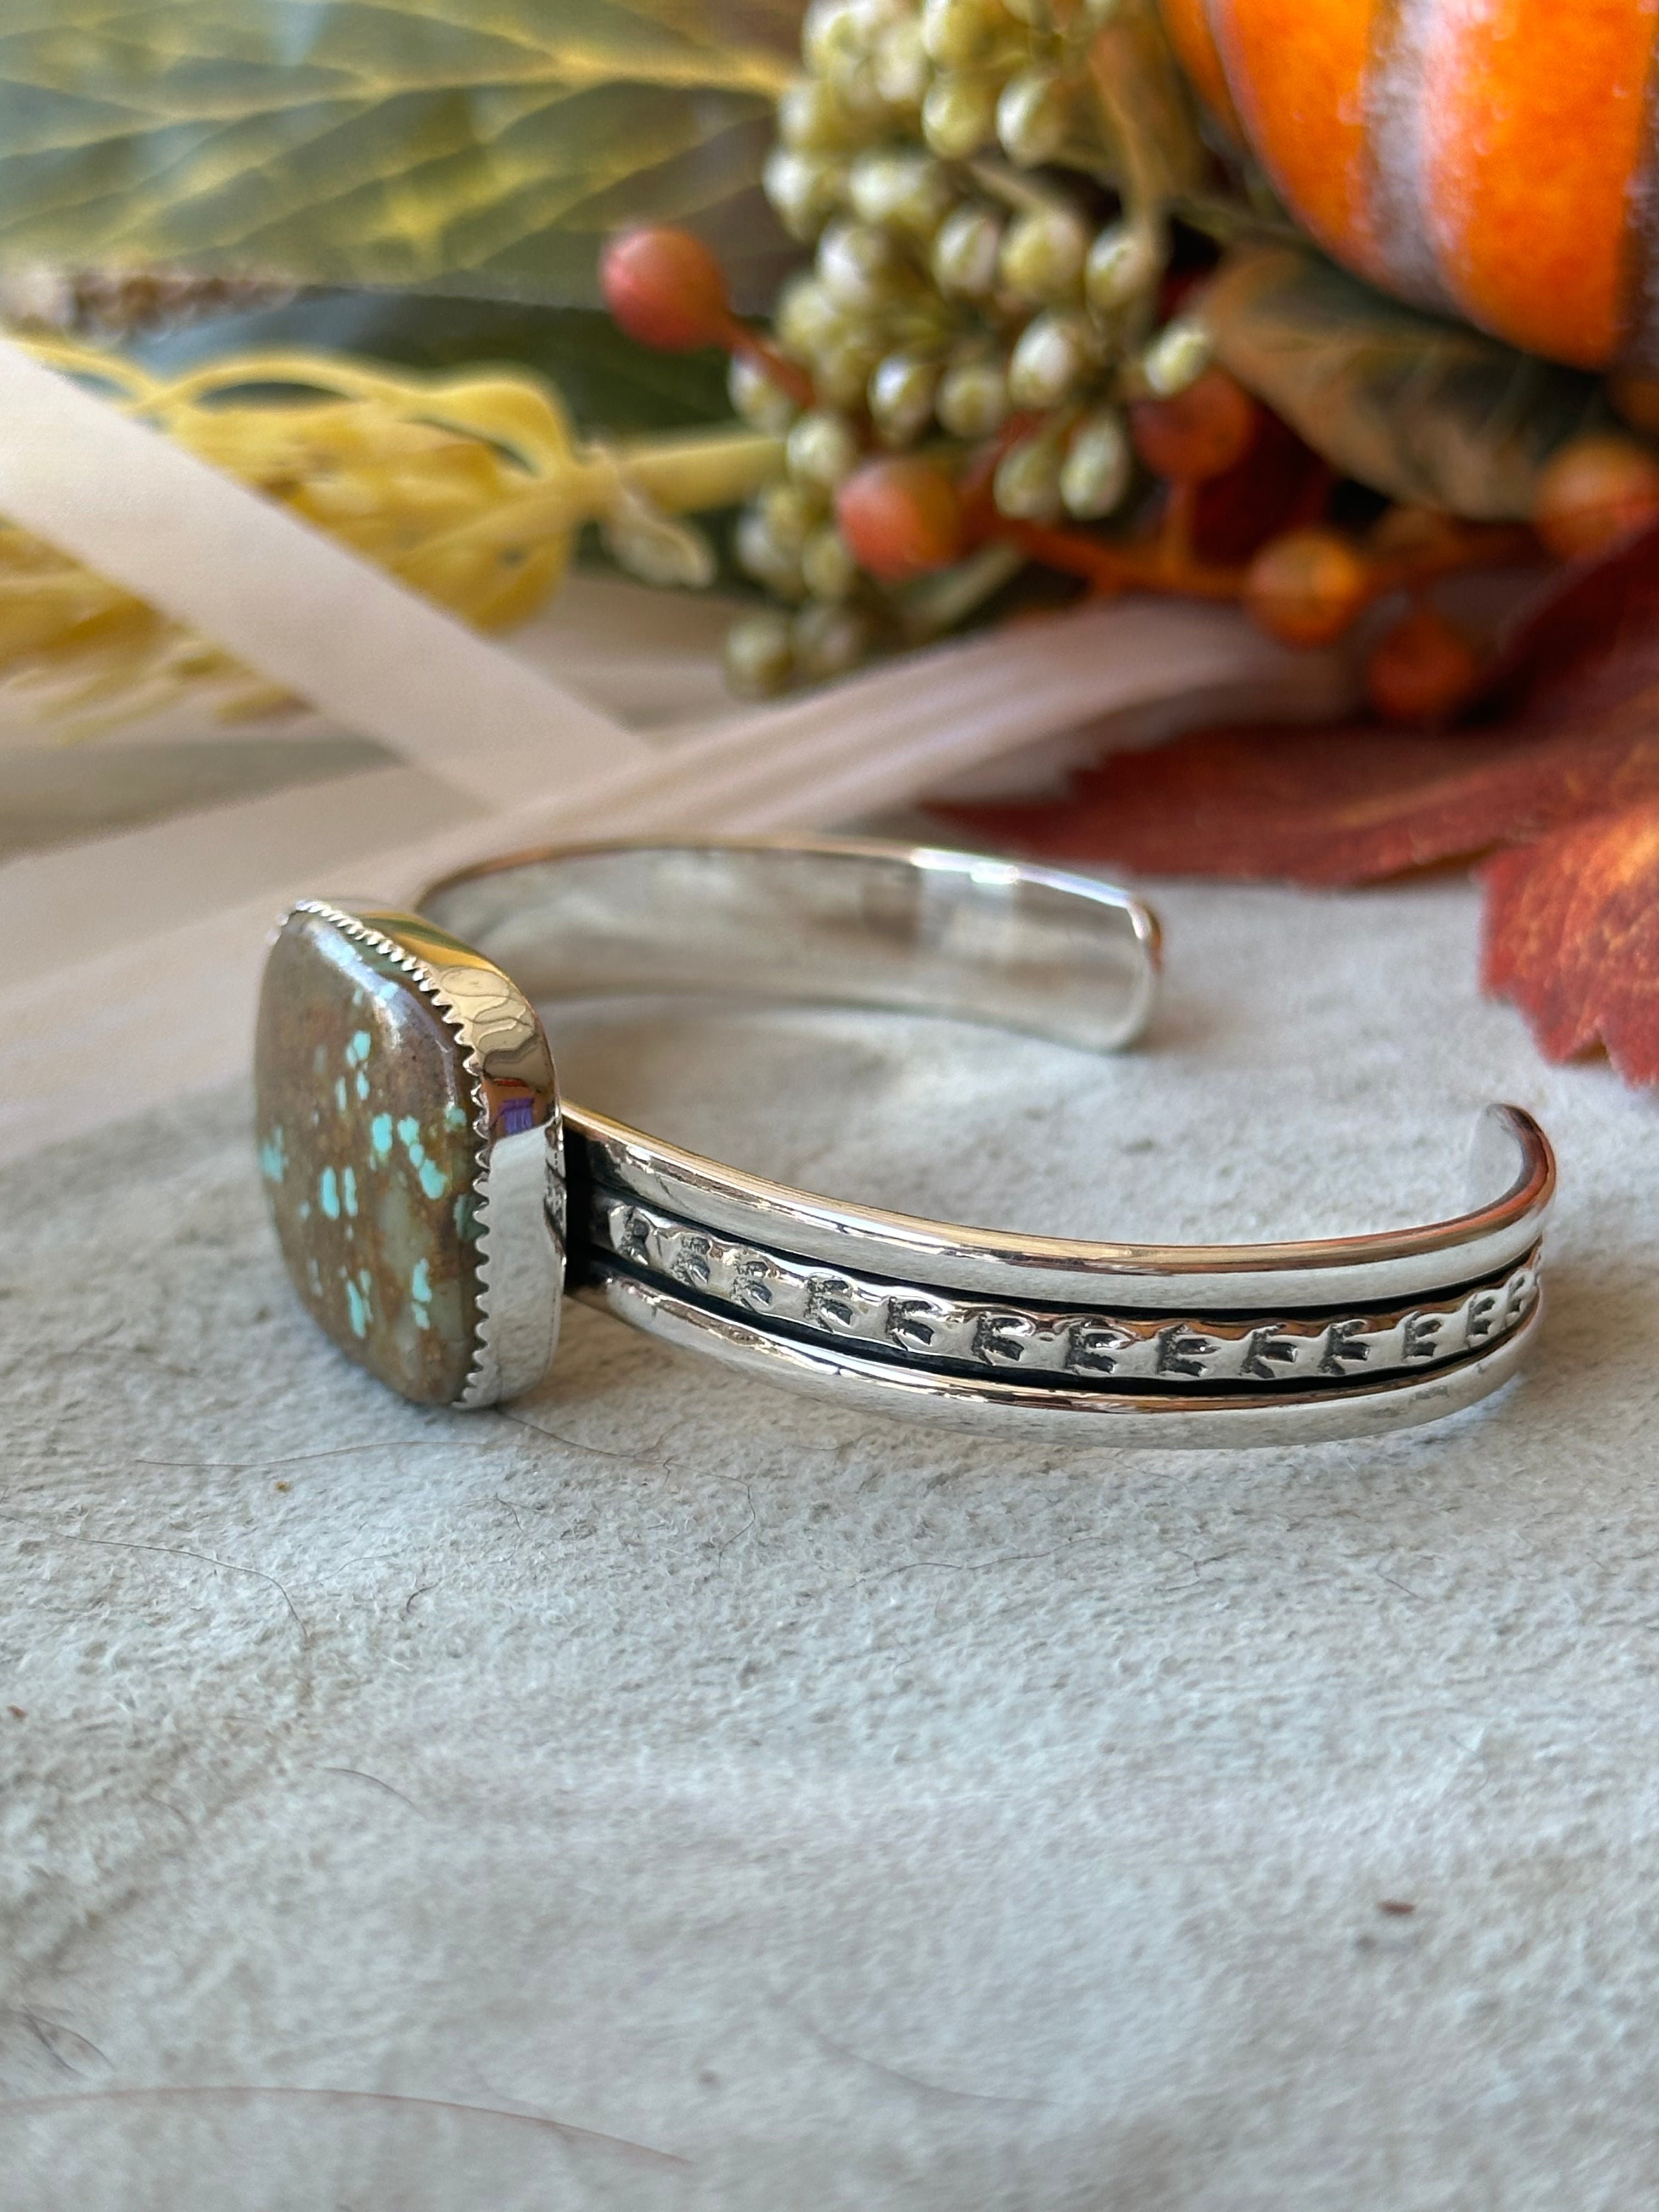 Southwest Made #8 Turquoise & Sterling Silver Cuff Bracelet